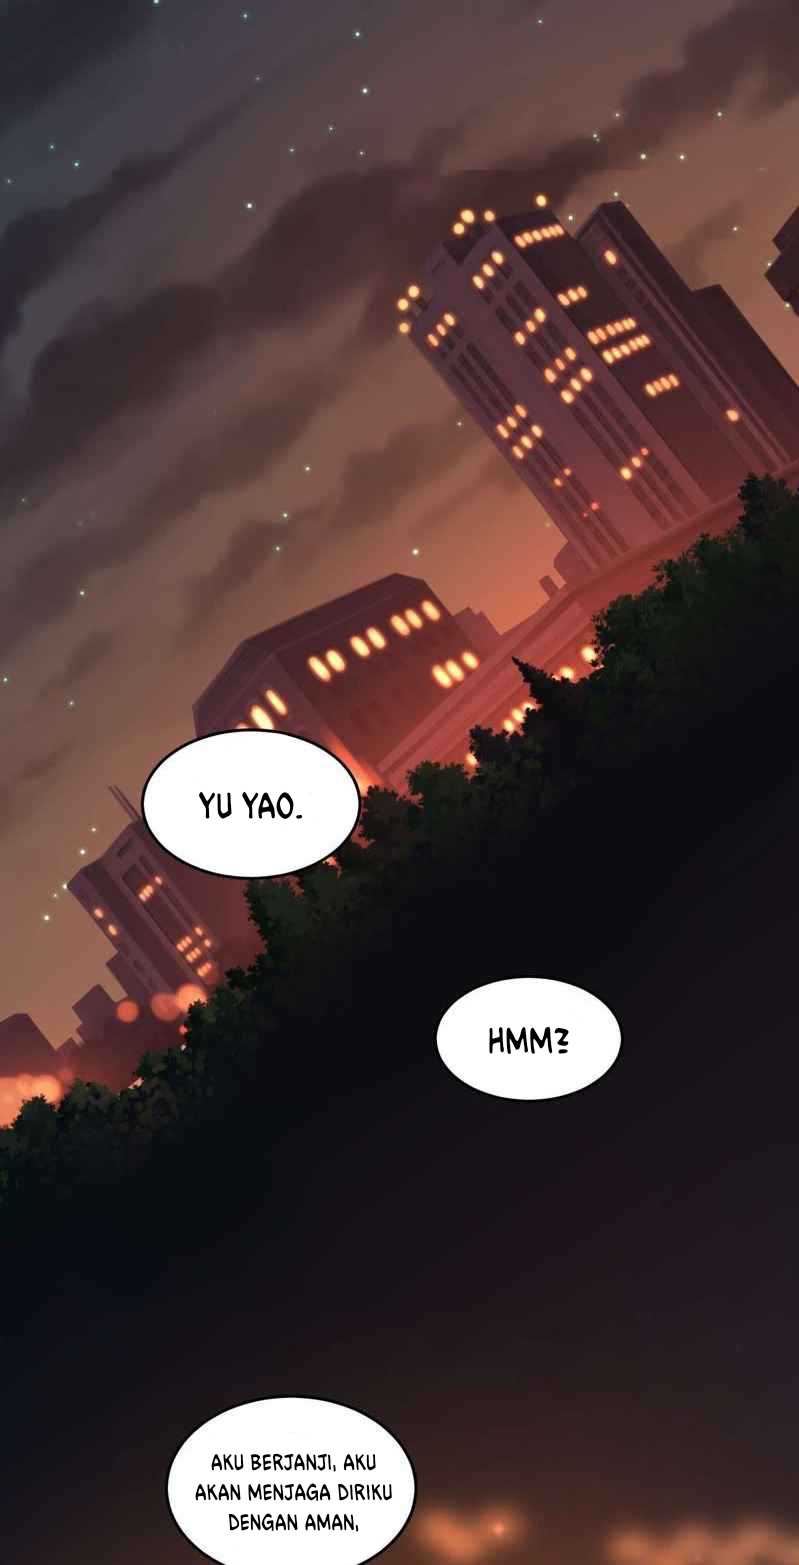 City Immortal Emperor: Dragon King Temple Chapter 9